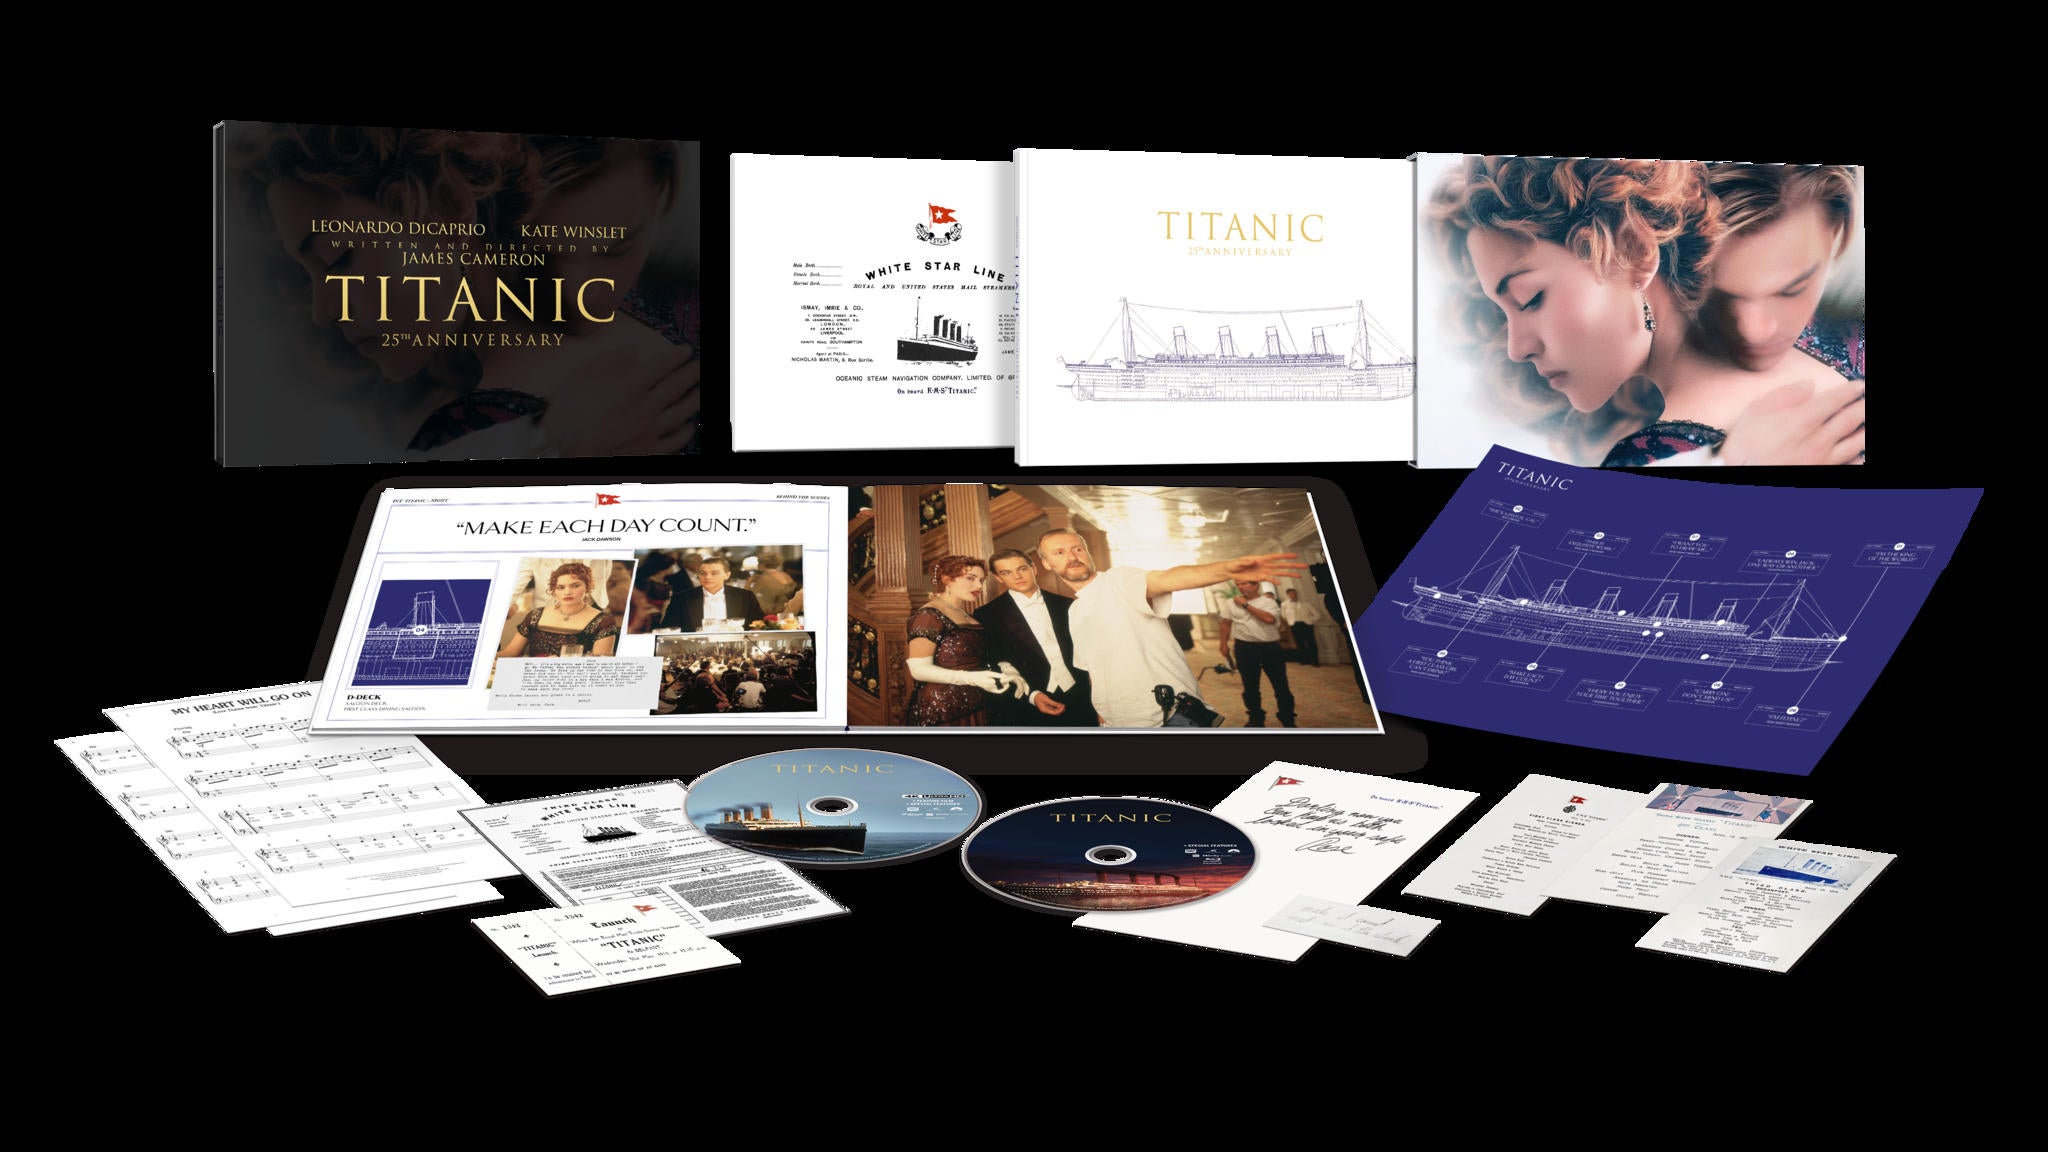 Titanic 4K Blu-ray And Collector's Edition Are Both On Sale, titanic 4k